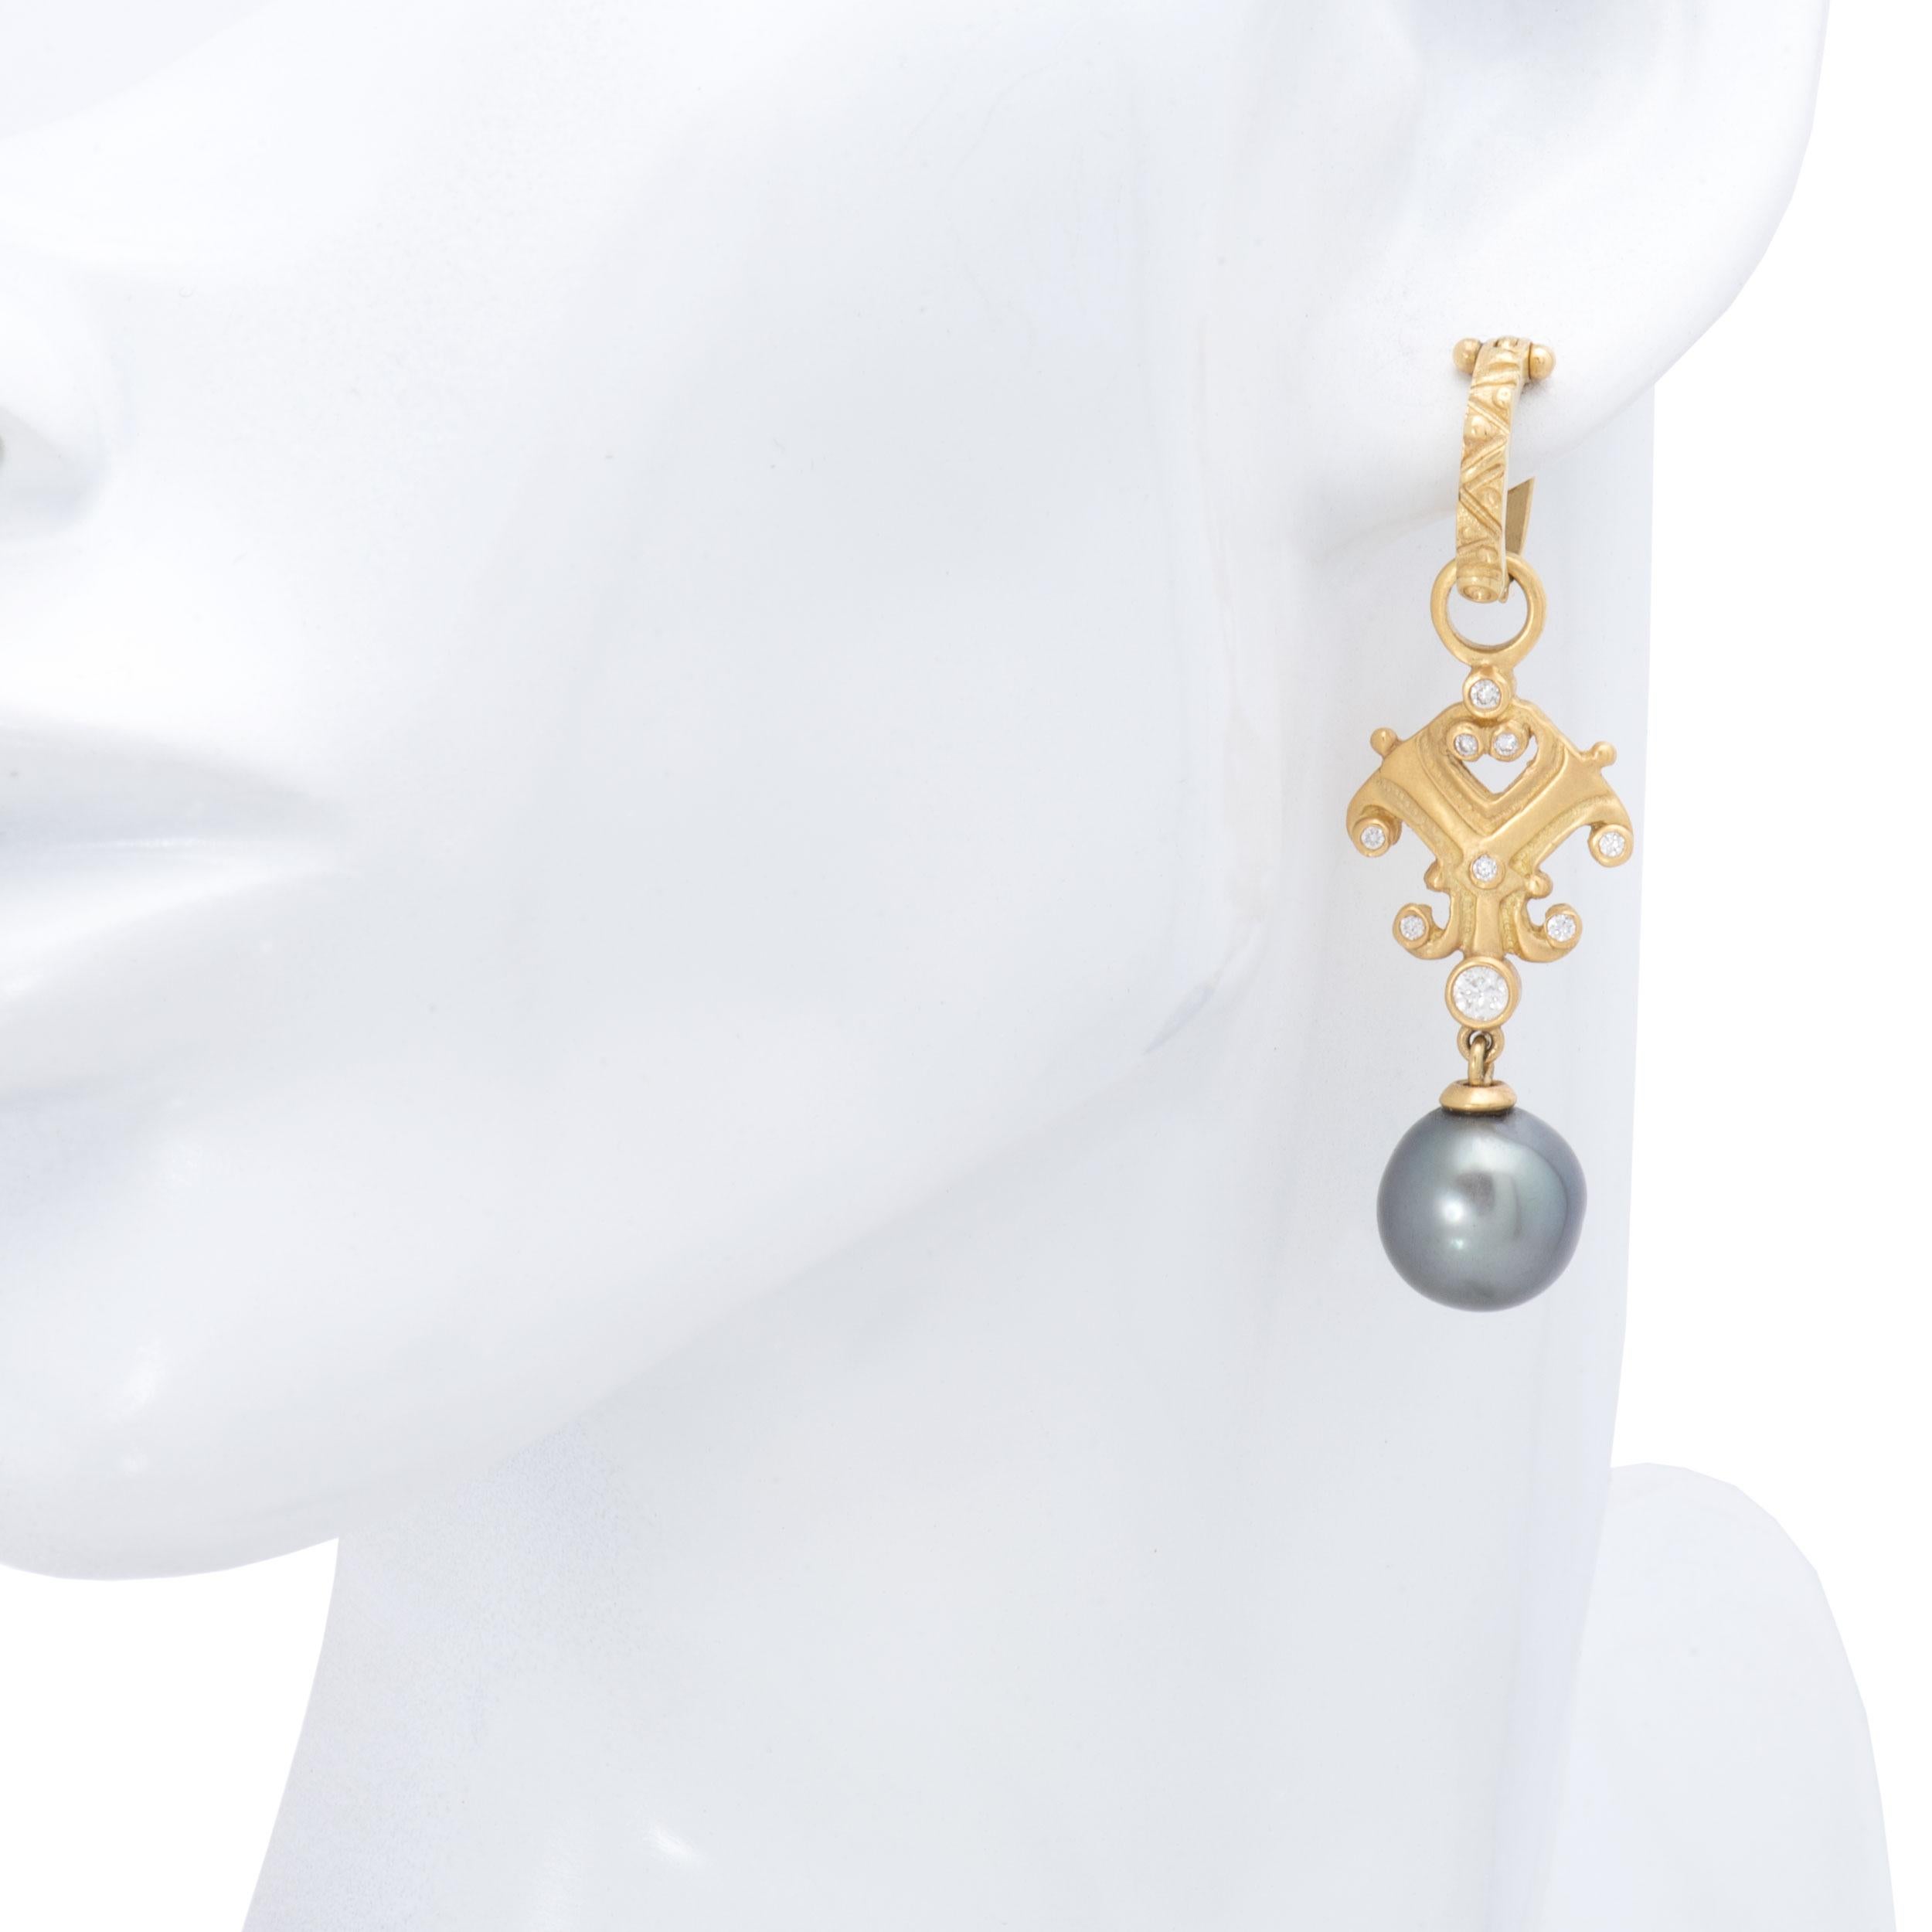 Tahitian Pearl Scroll Drop Earrings with Diamonds in 18 Karat Gold In New Condition For Sale In Santa Fe, NM